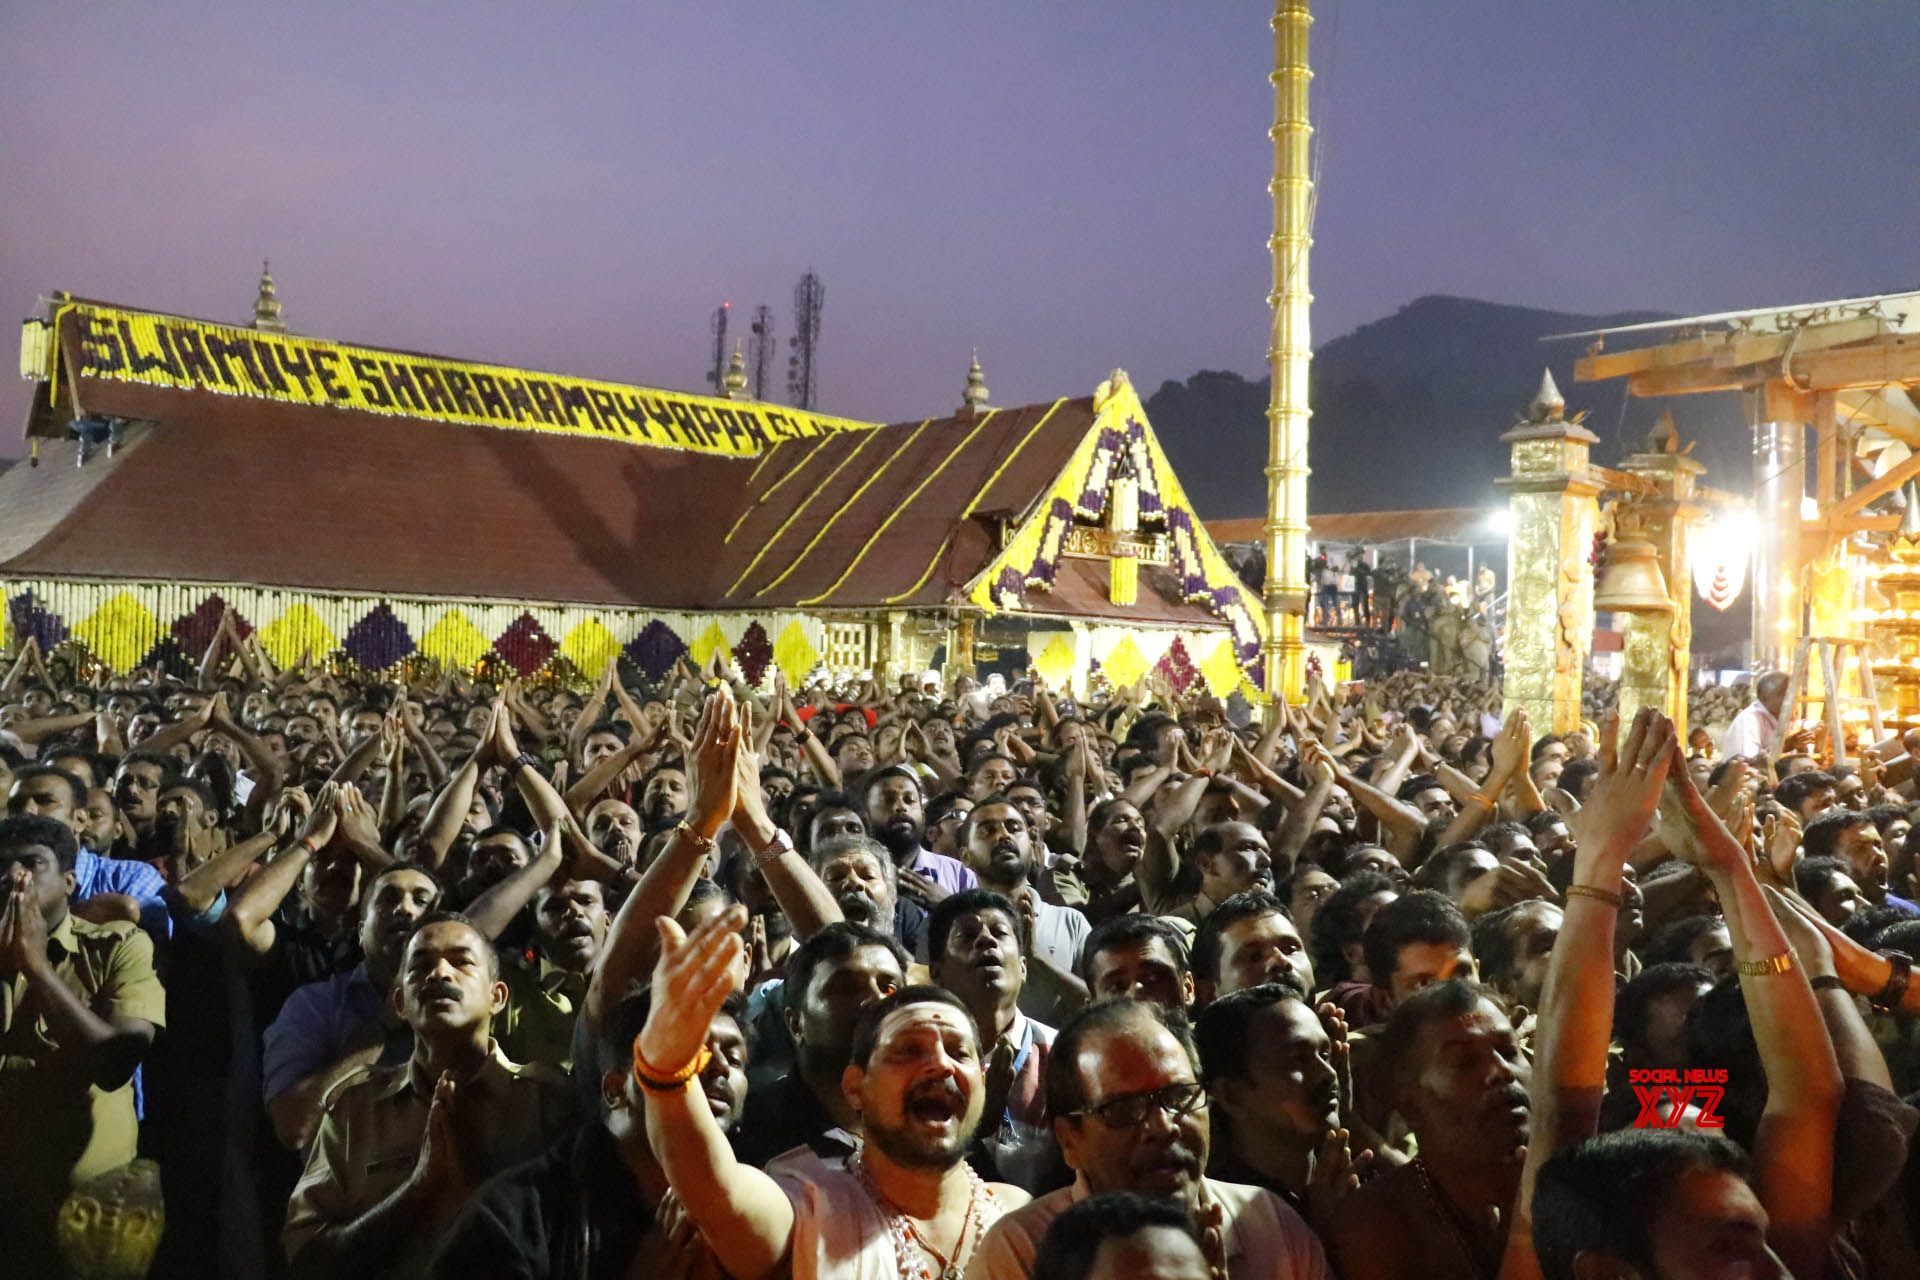 The SC has lifted the centuries-old ban on women's entry to the Sabrimala temple thus granting women their freedom of choice to worship.